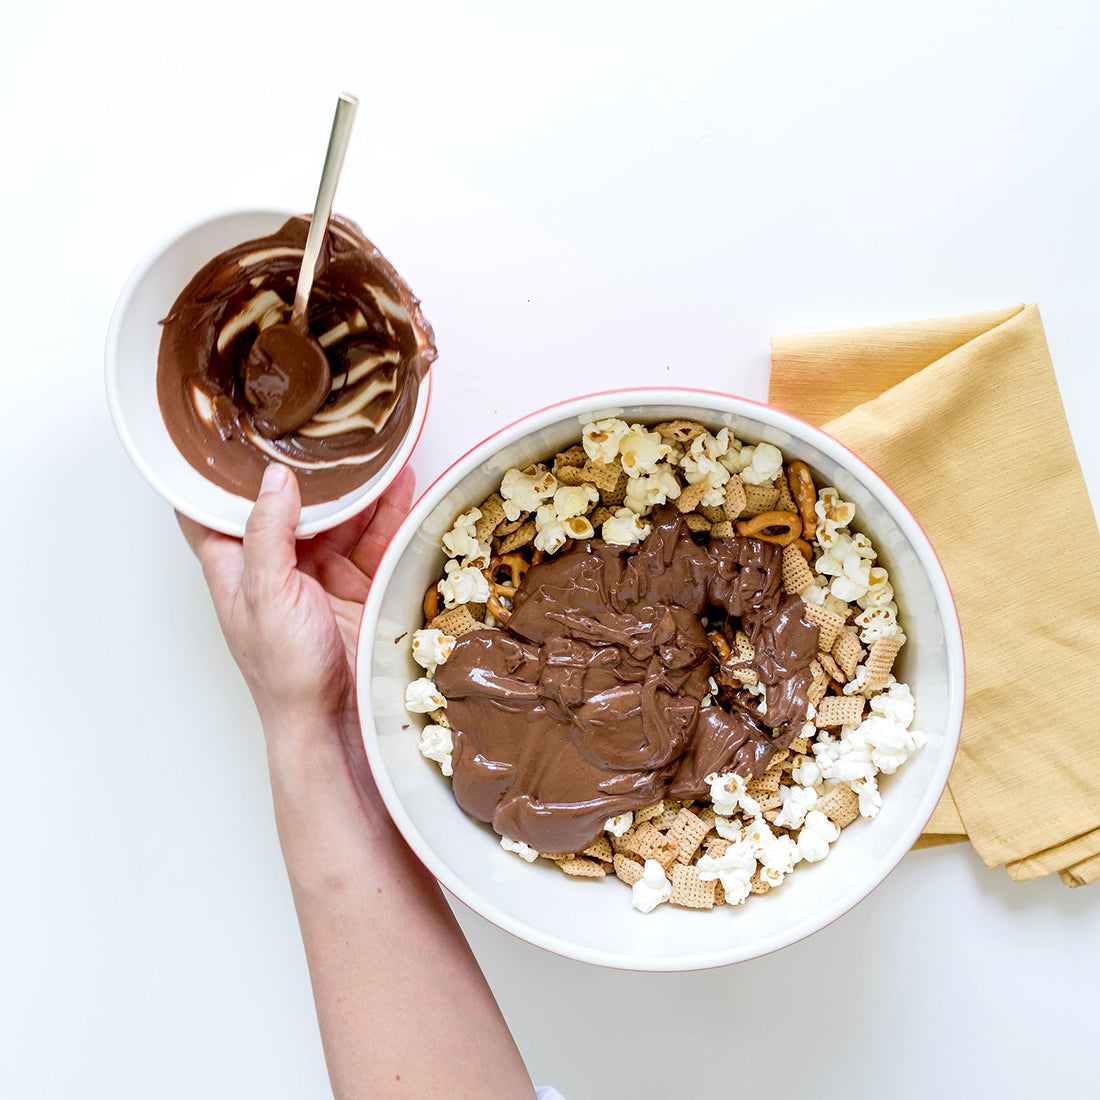 Image from above of a bowl filled with ingredients for Miss Jones Baking Co Confetti Pop Puppy Chow Snack Mix, topped with chocolate sauce next to another bowl of chocolate